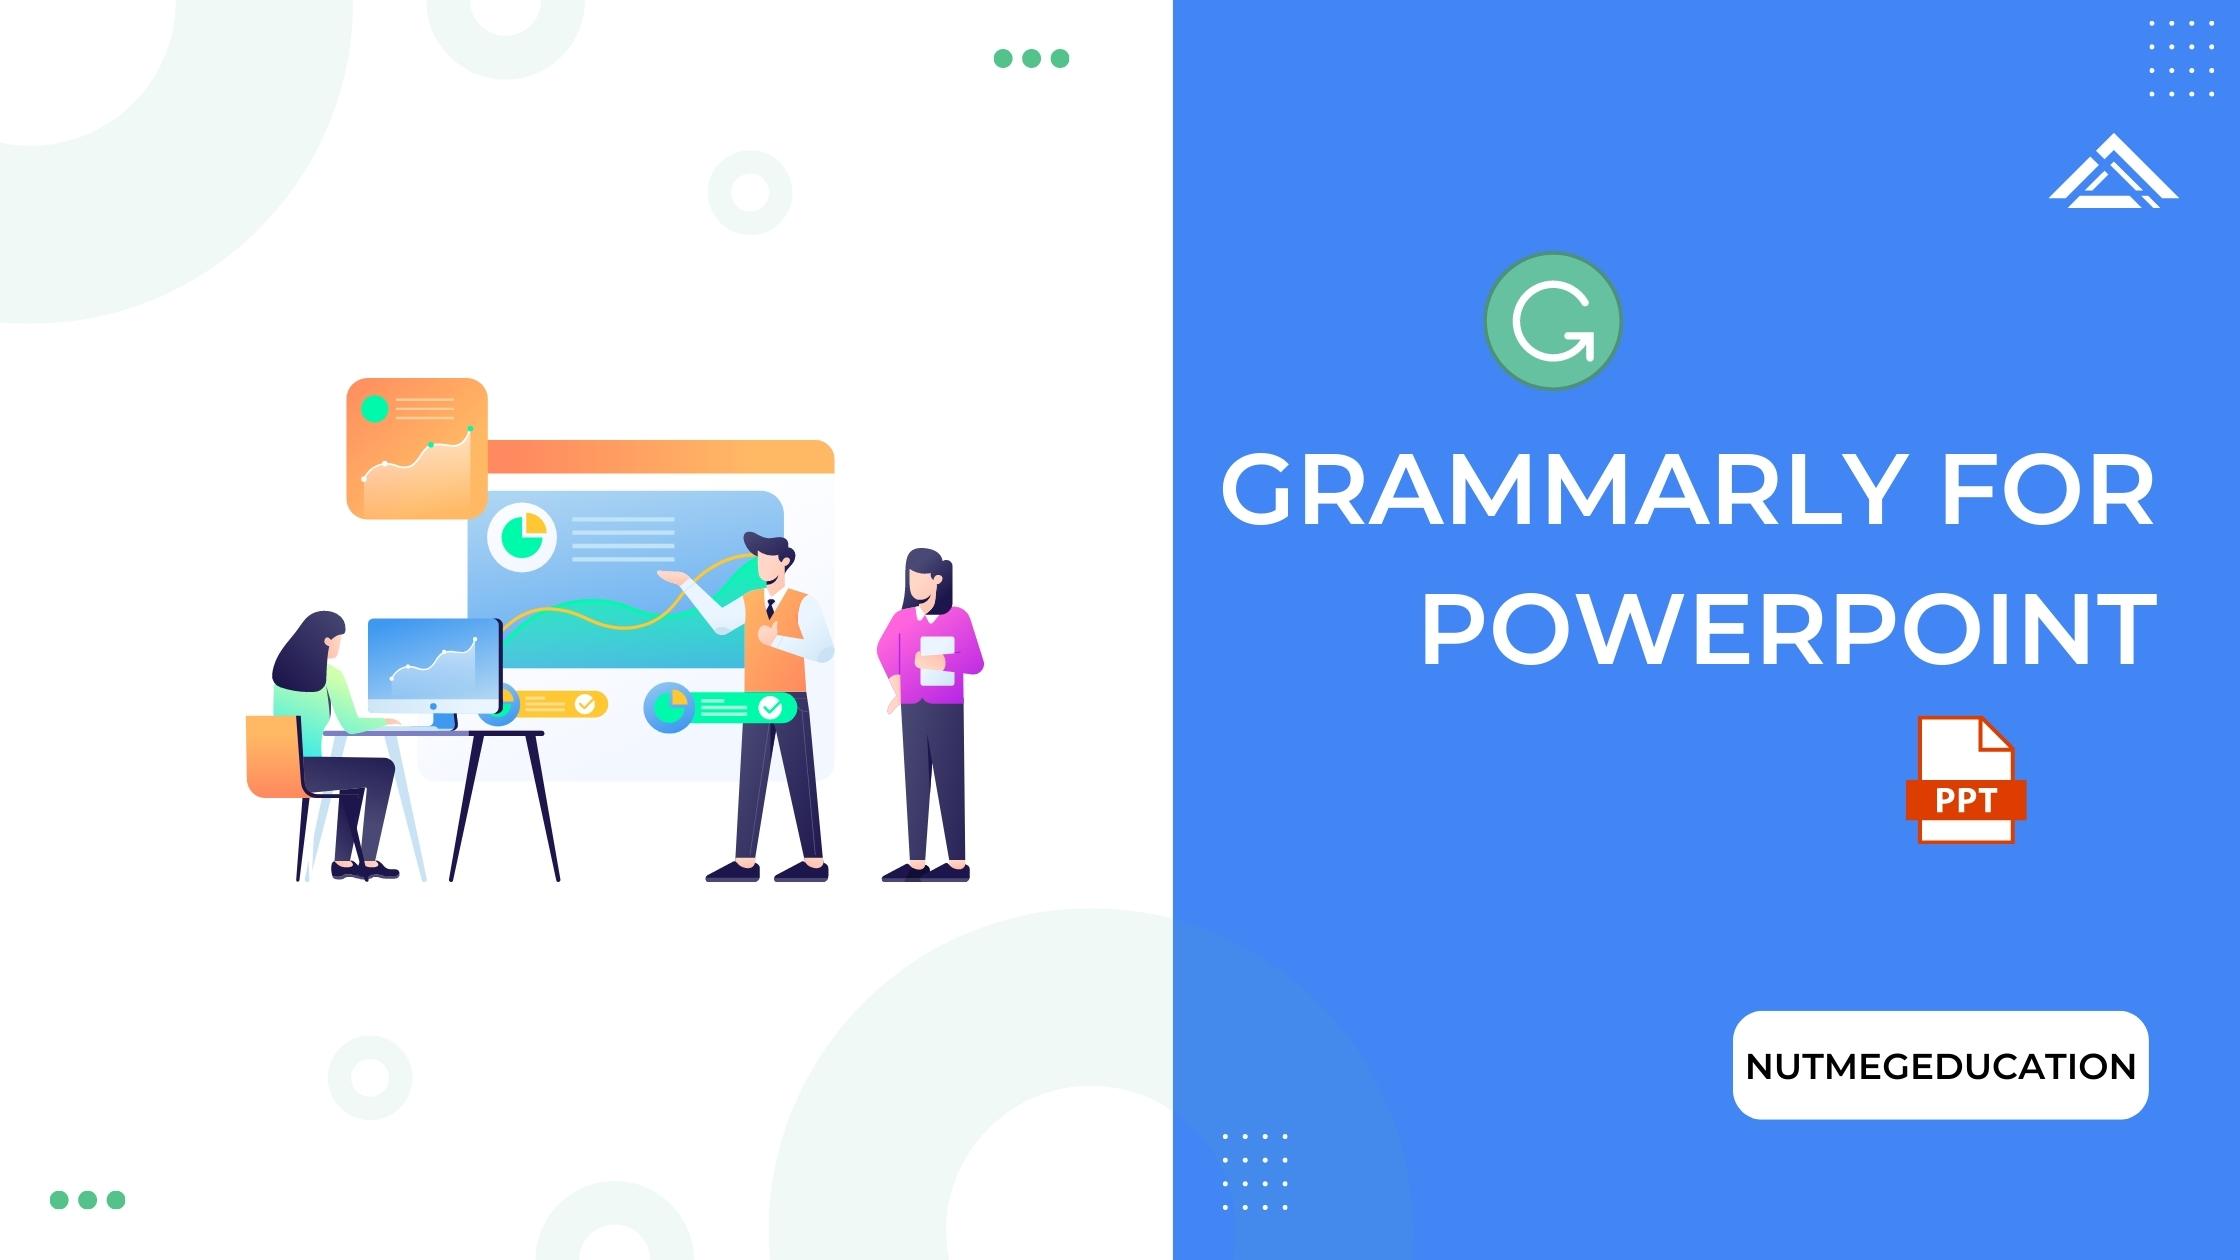 Grammarly for Powerpoint